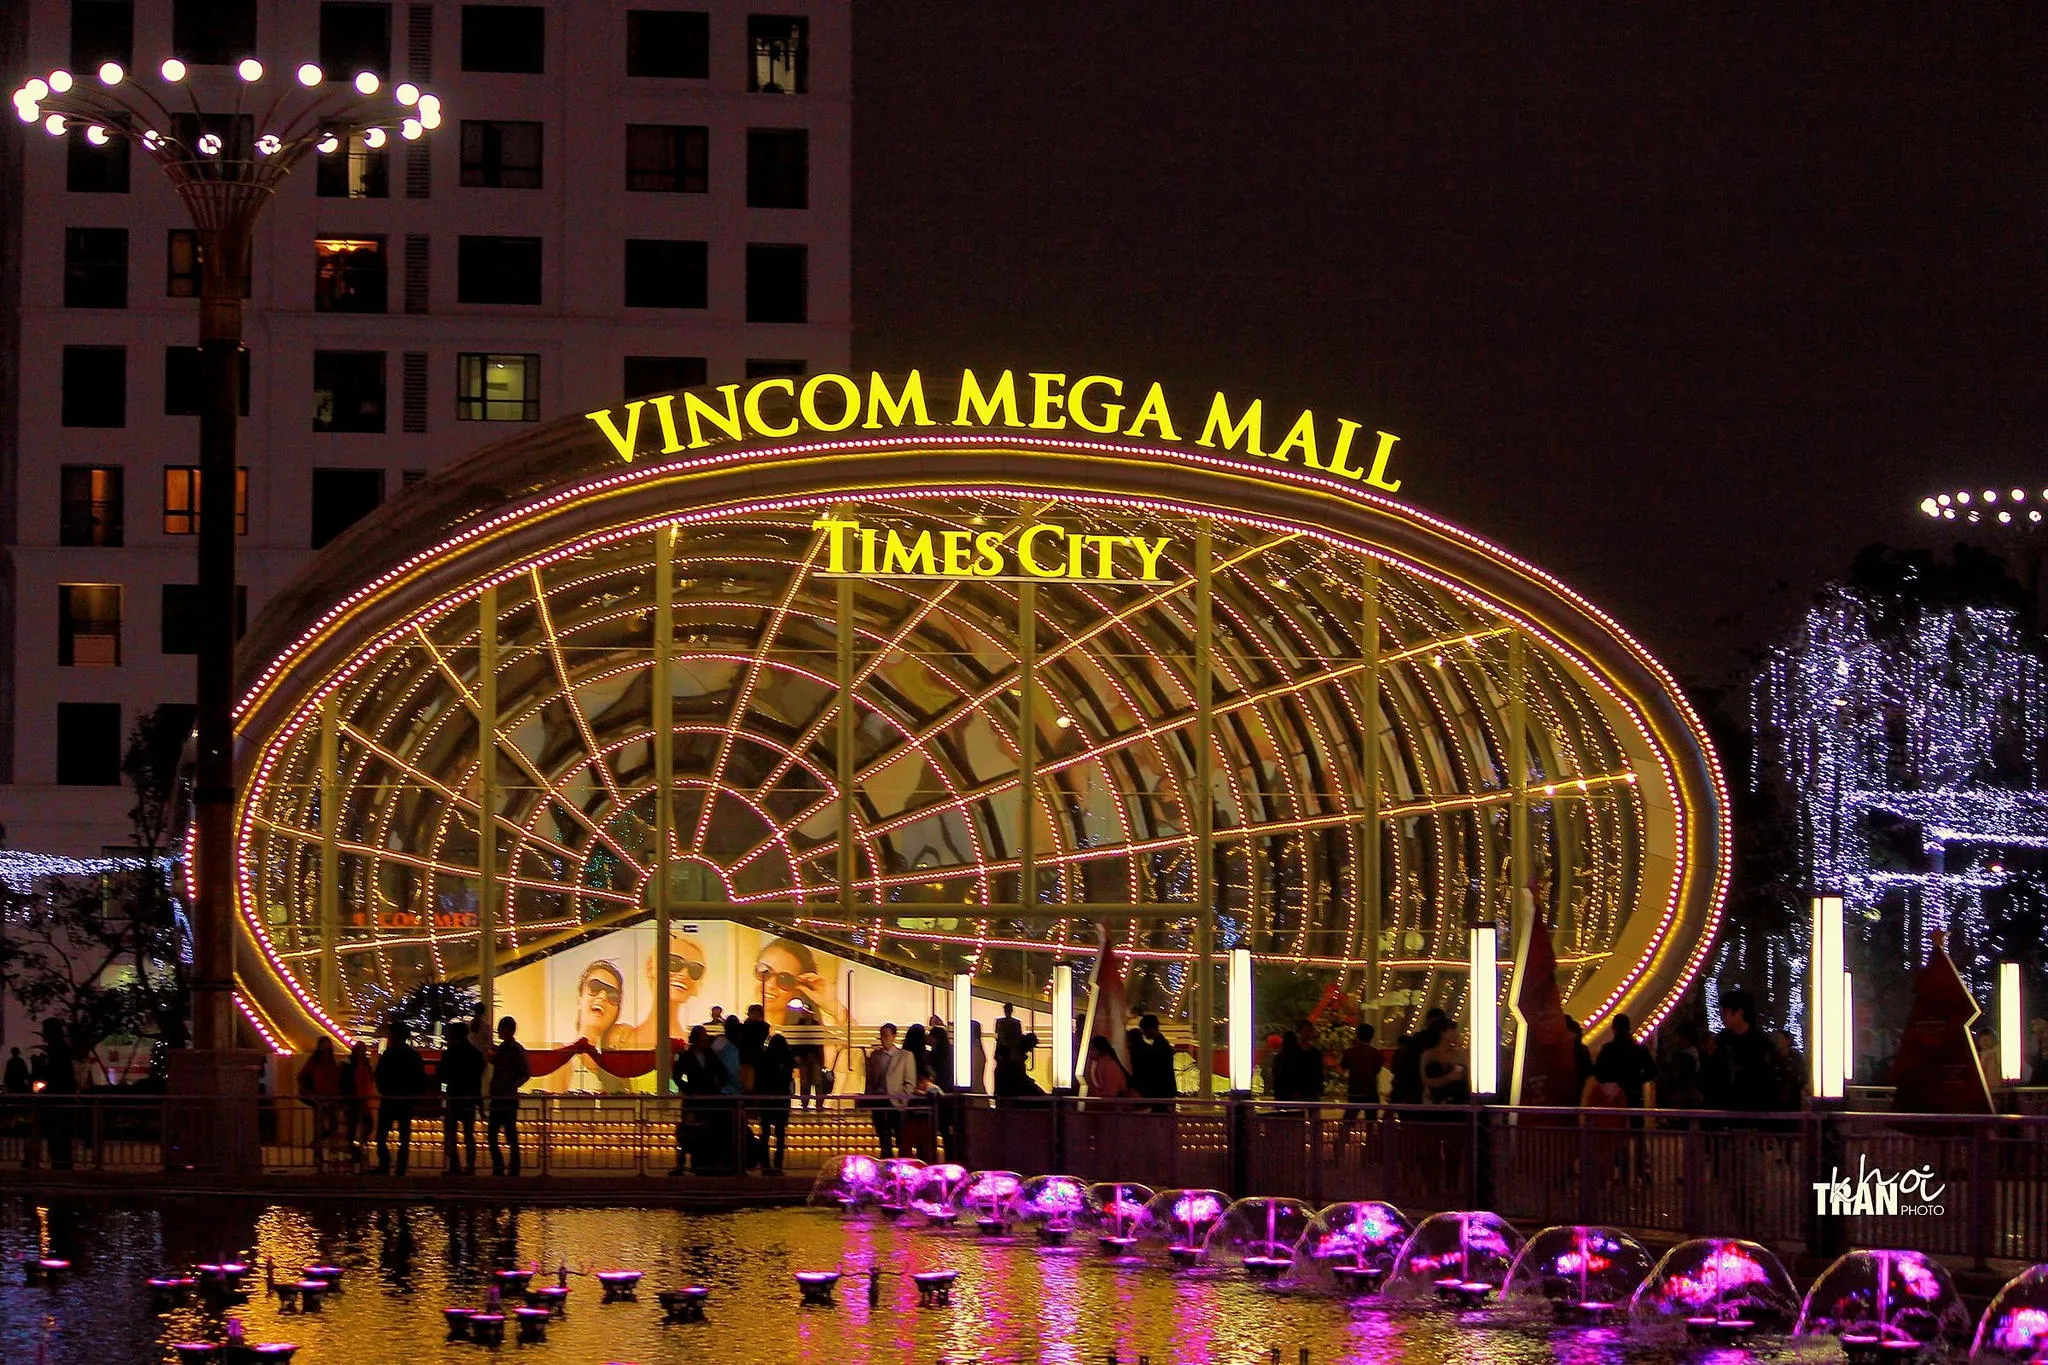 Vincom Mega Mall Times City in Vietnam, east_asia | Handbags,Shoes,Accessories,Clothes,Natural Beauty Products,Travel Bags,Jewelry - Country Helper